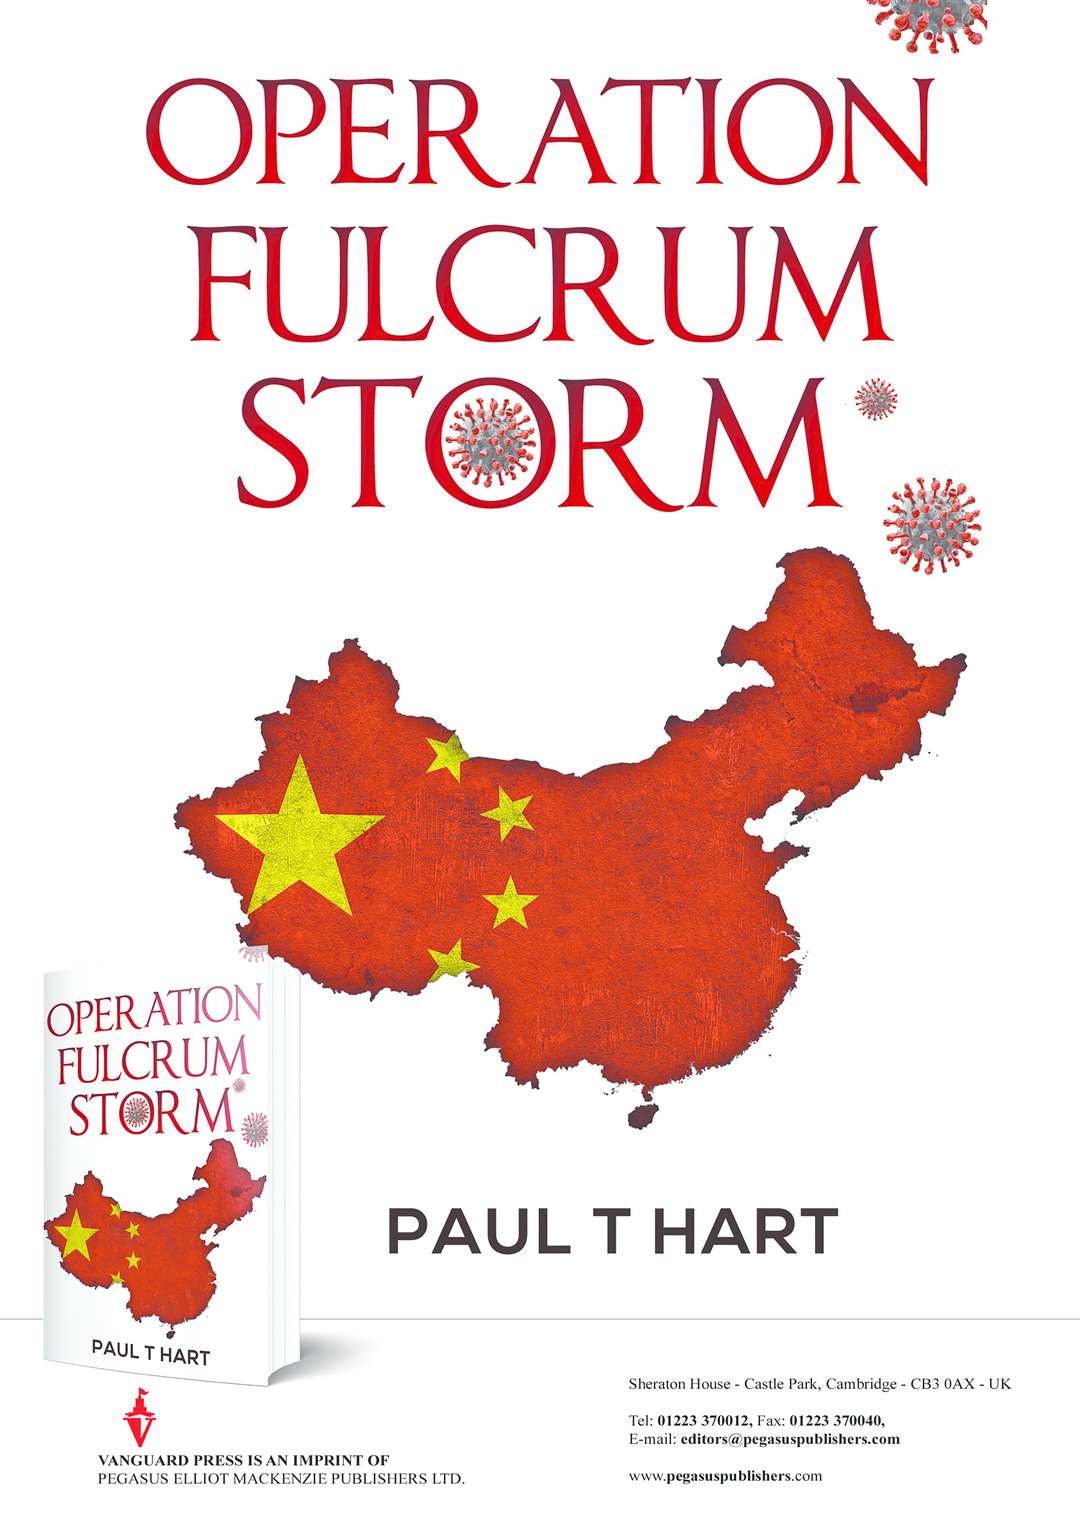 The cover of Operation Fulcrum Storm.